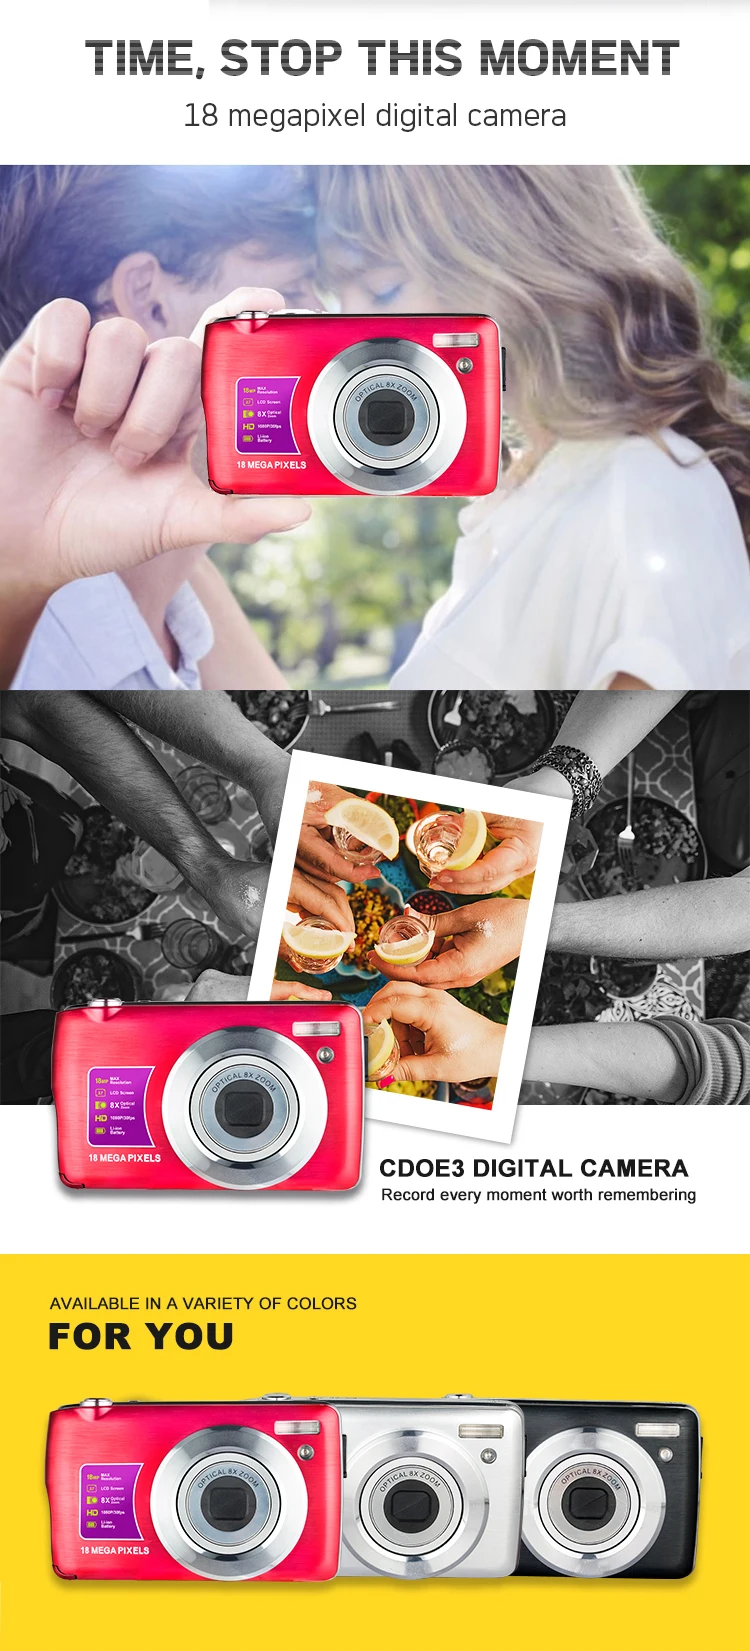 Digital Cameras For Beginners 2.7 Inch Rechargeable Kids Cameras 8X Digital Zoom Compact Camera